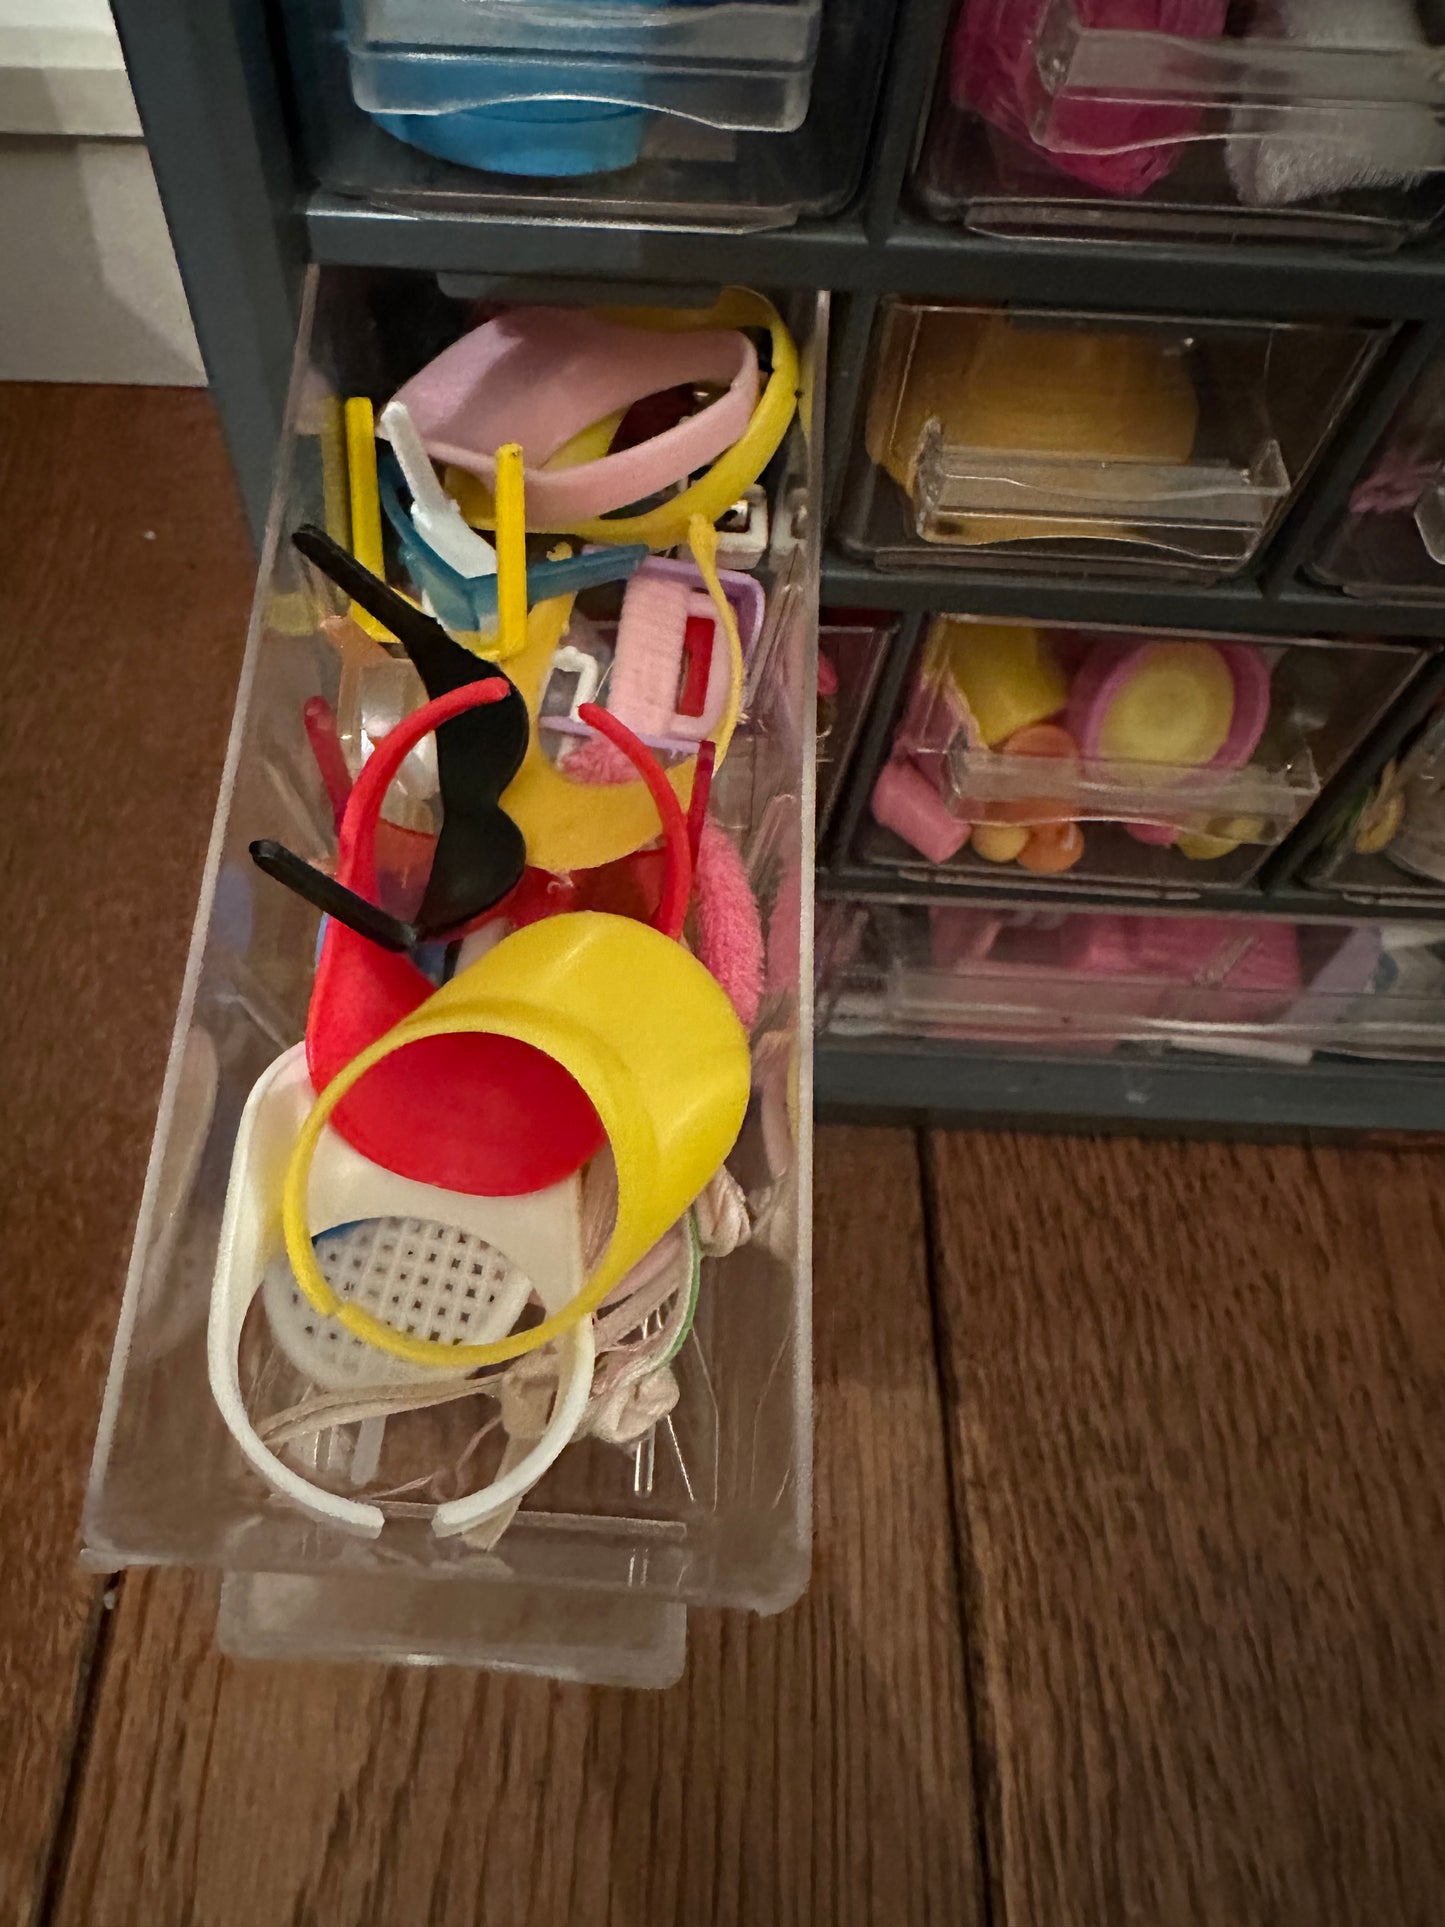 Barbie Accessories in bulk (and container)